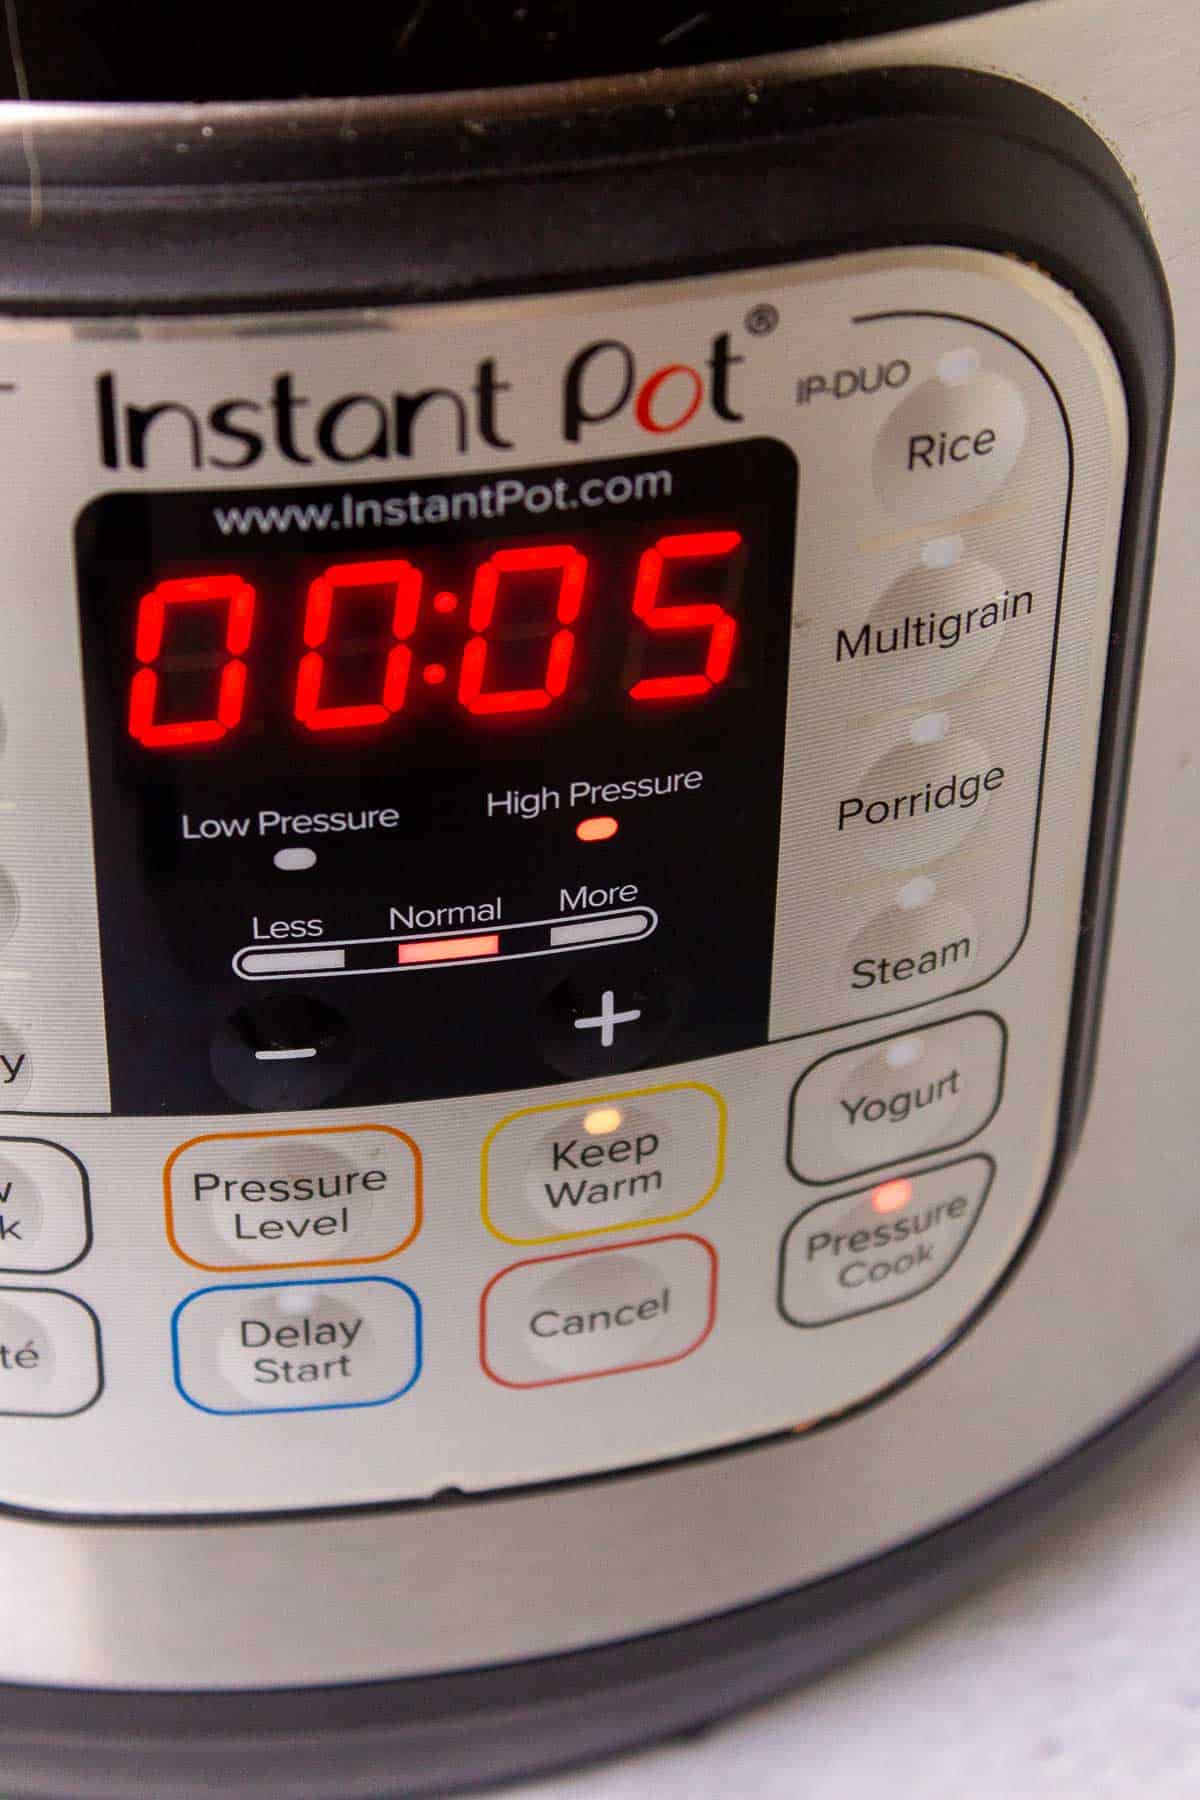 Instant Pot display showing the pot is set to pressure cook on high for 5 minutes